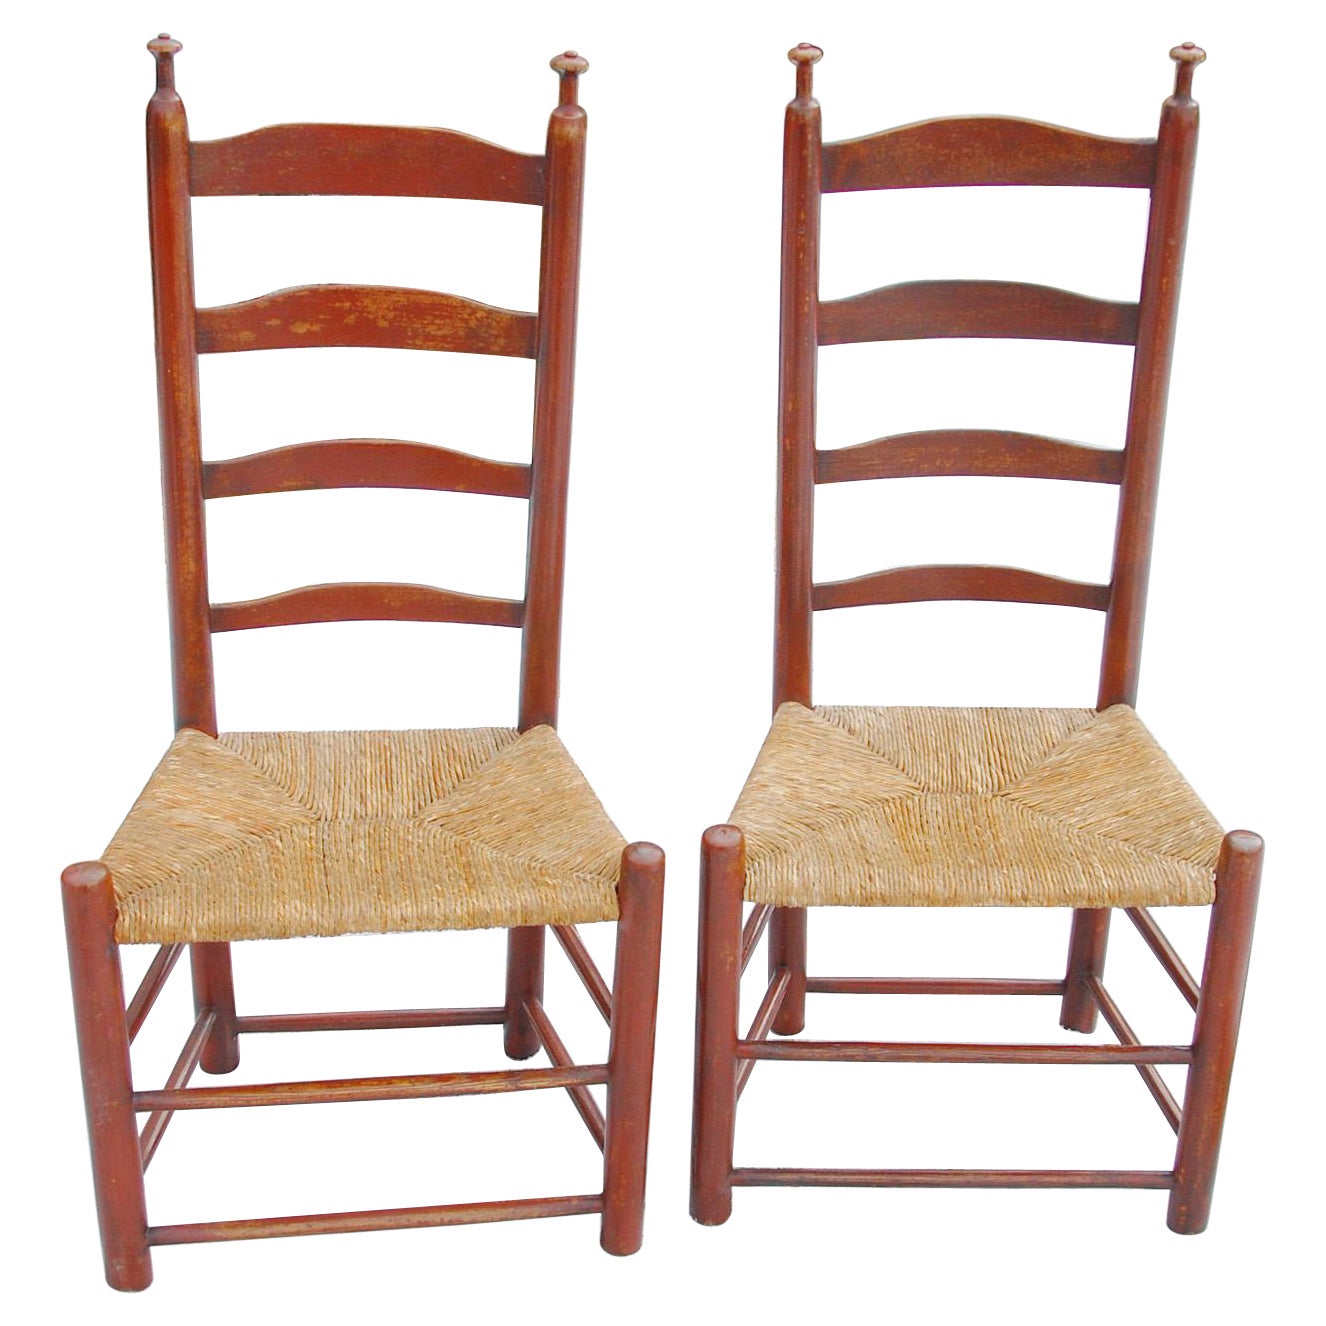 American 18th Century Pair of Ash Ladderback Side Chairs with Original Paint